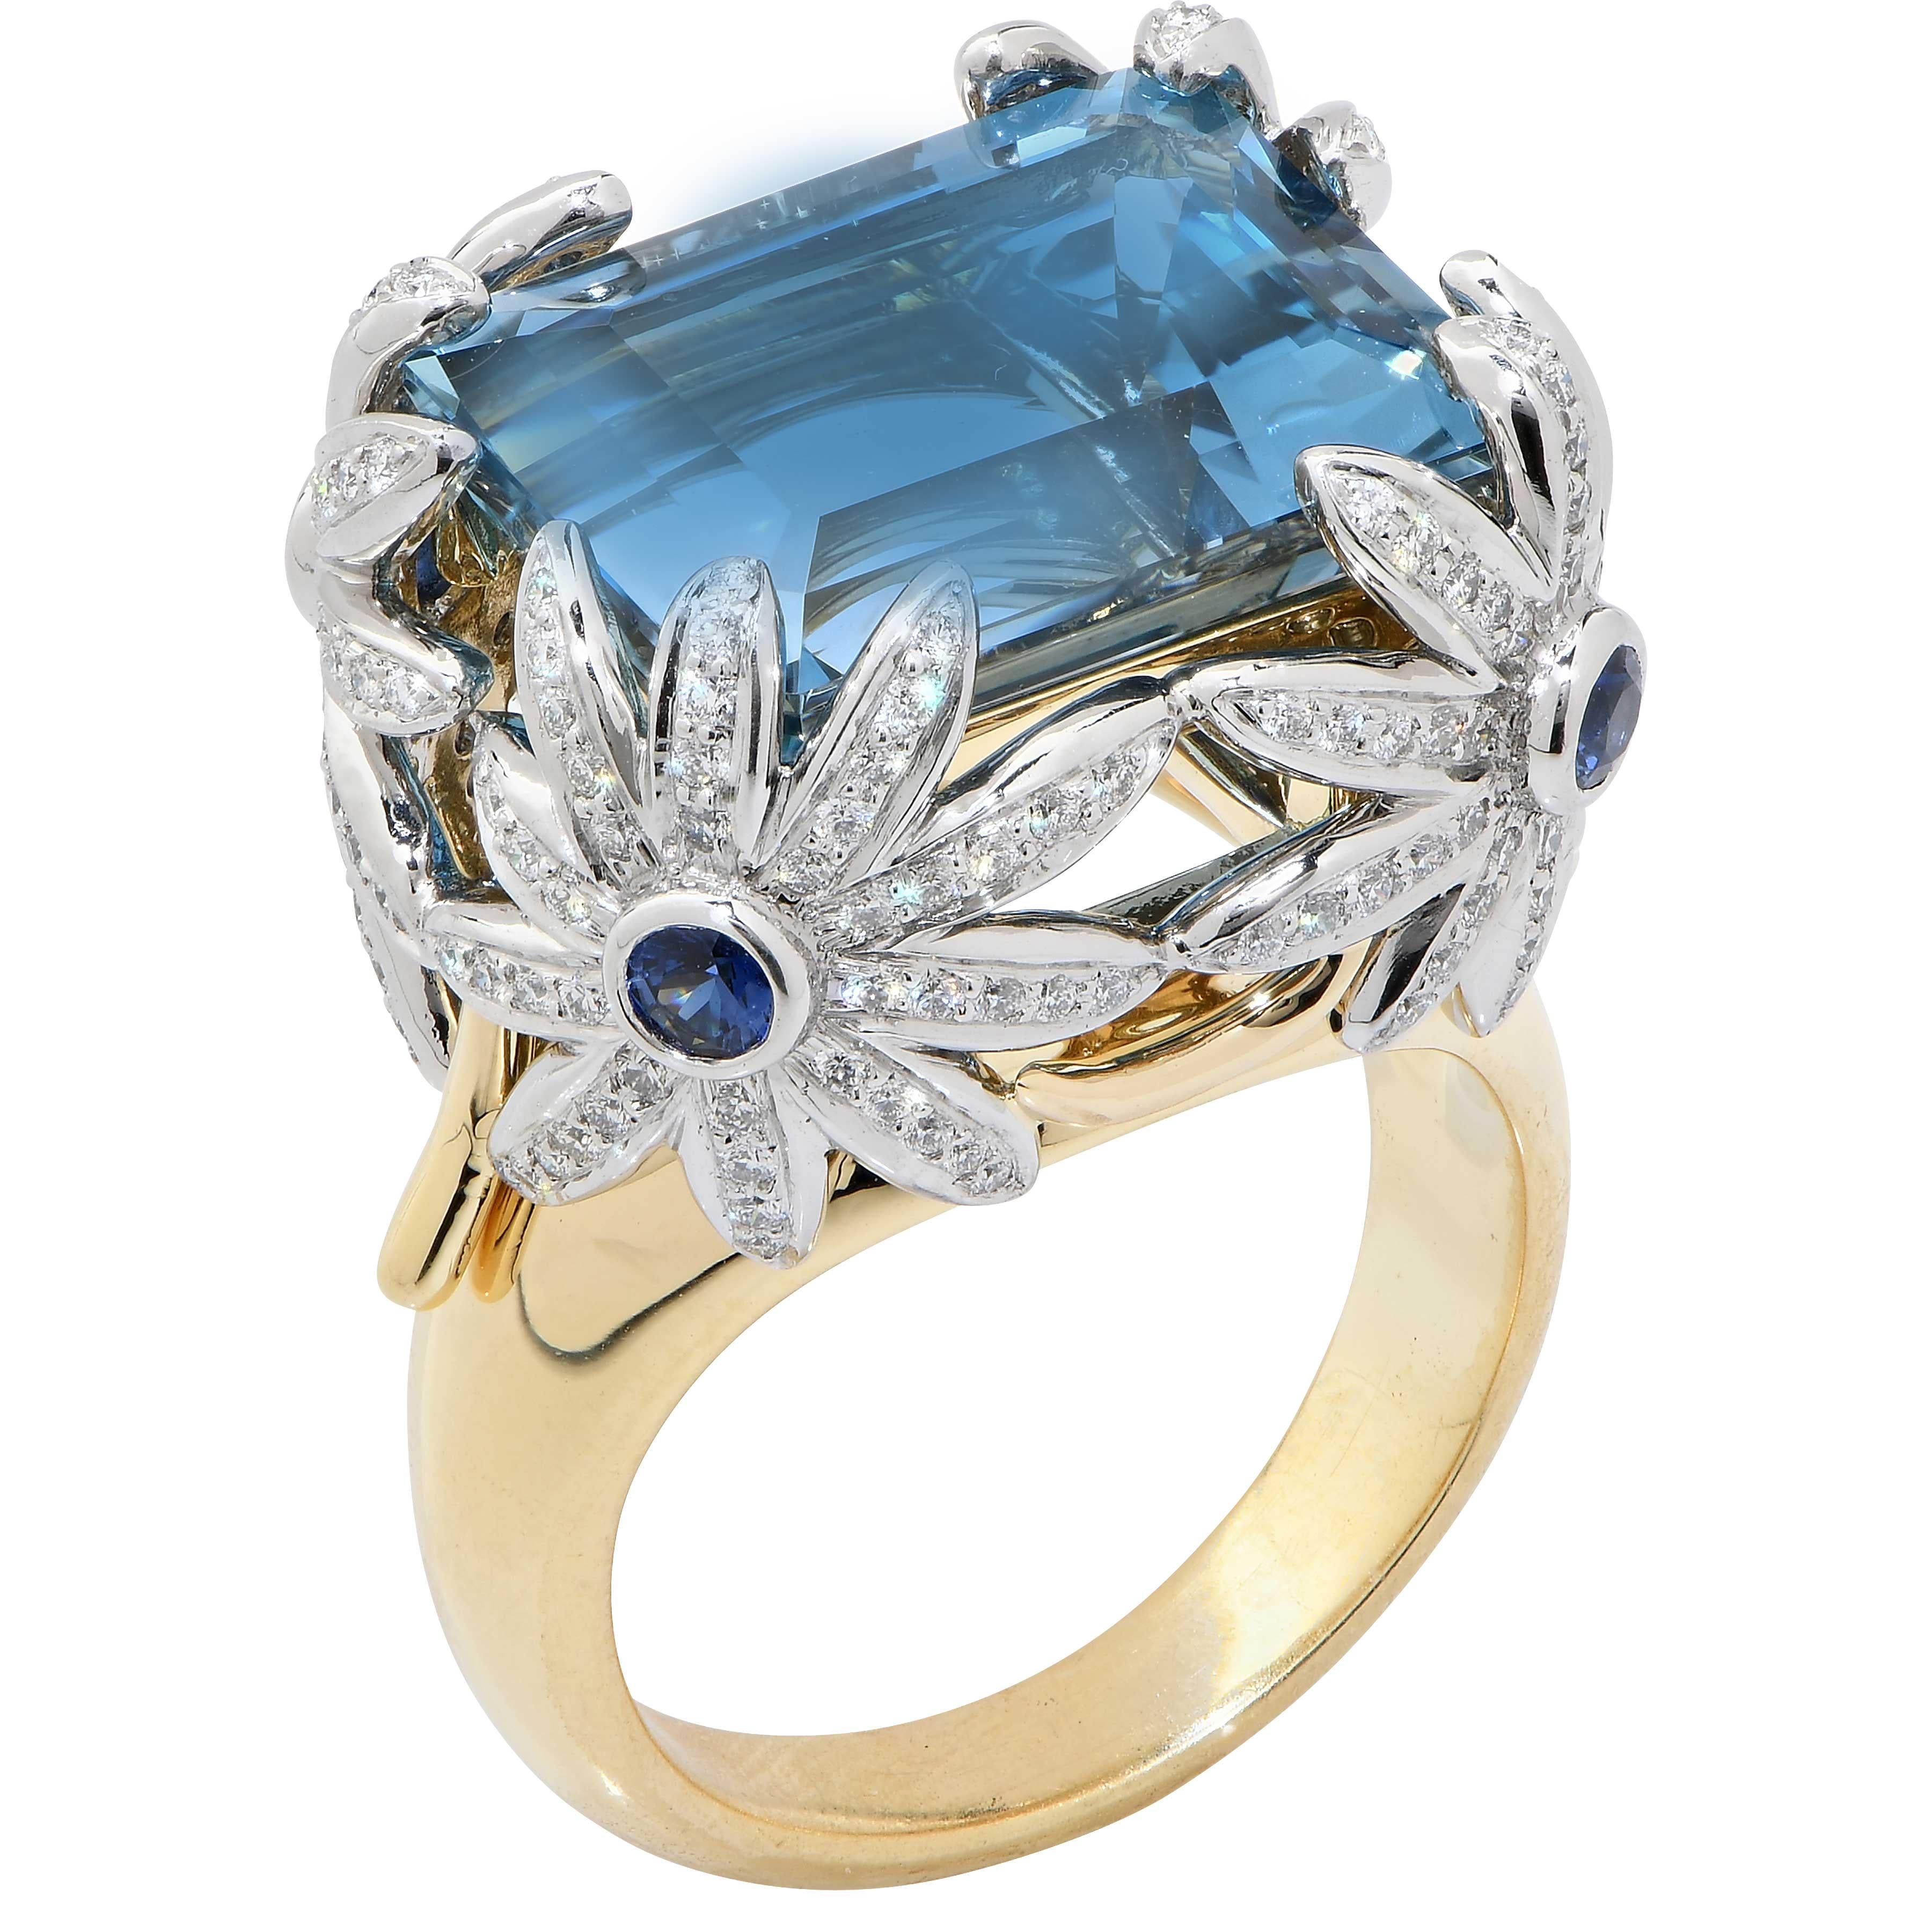 This beautiful ring by Jean Schlumberger denotes the artist's gift for whimsy and incorporation of natural motifs in his work. The ring features an 11 carat fine aquamarine as well as diamonds and sapphires. Four daisy blossoms hold the aquamarine